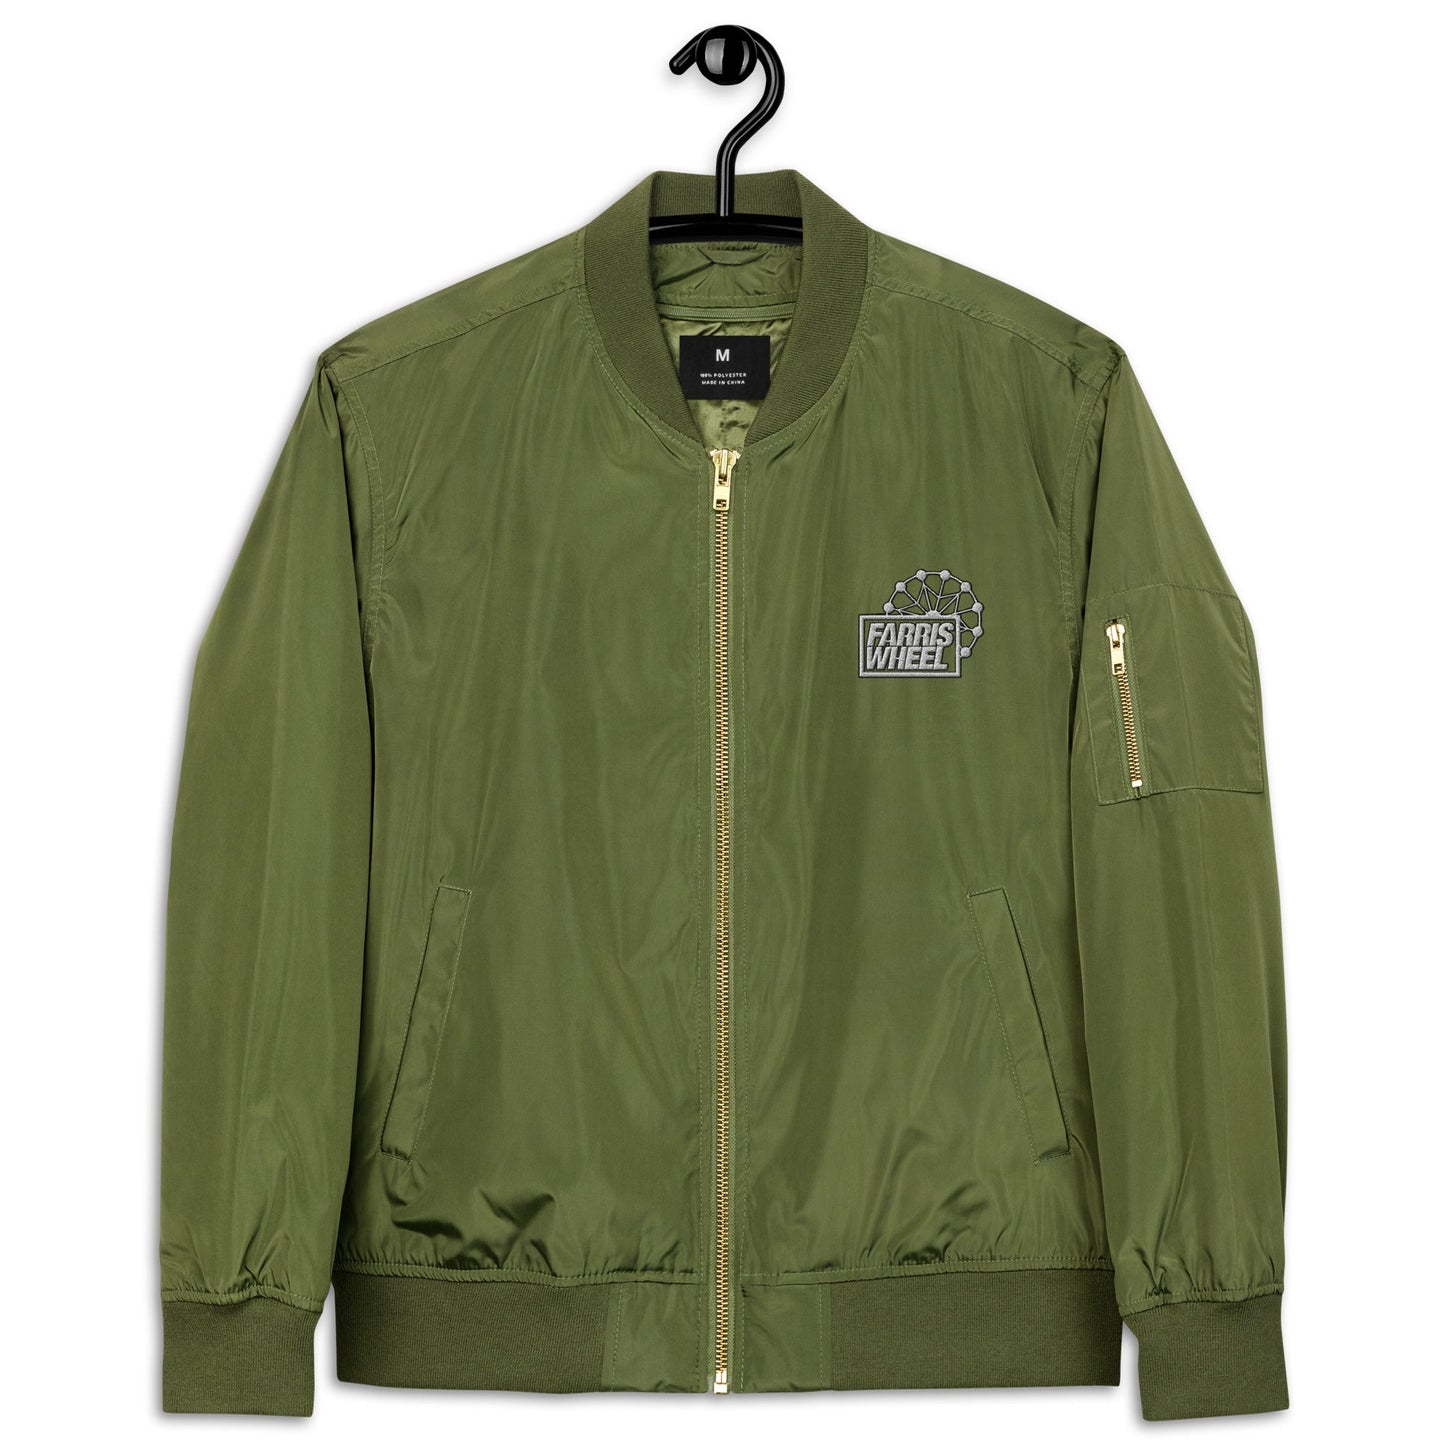 Farris Wheel Limited Premium Bomber Jacket - BeExtra! Apparel & More